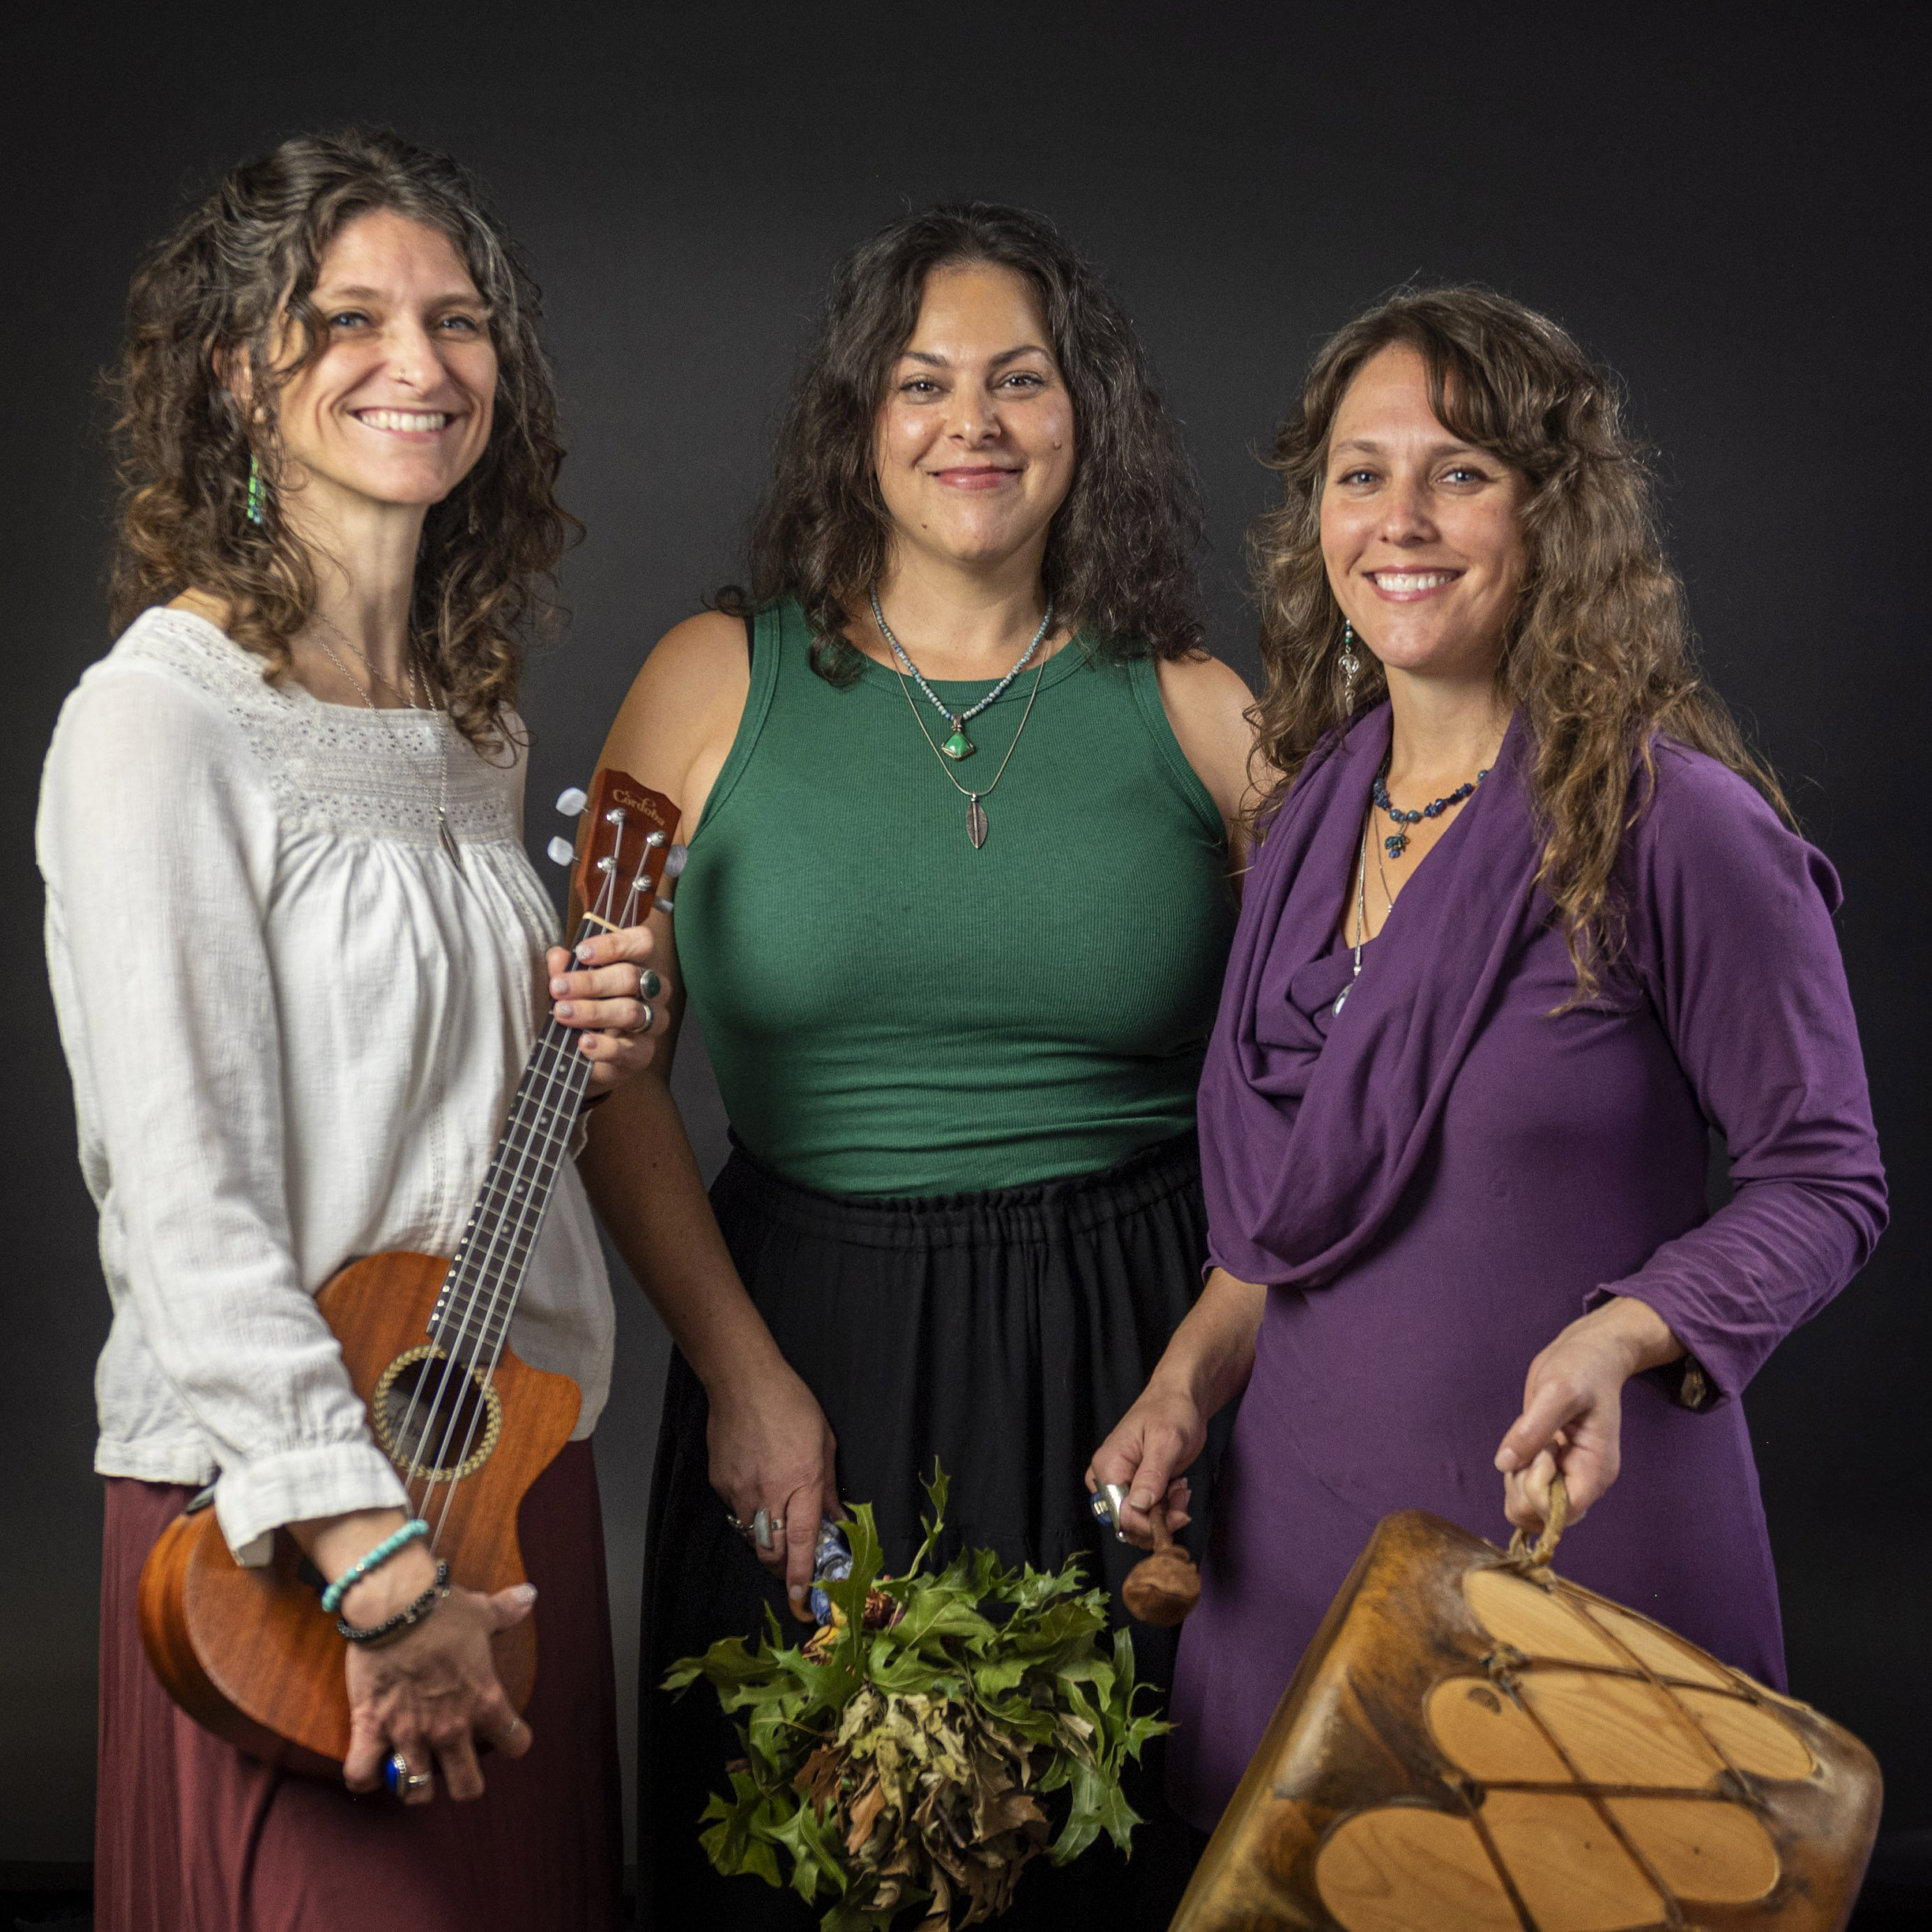 Interview and performance with Woven, an ethereal musical trio